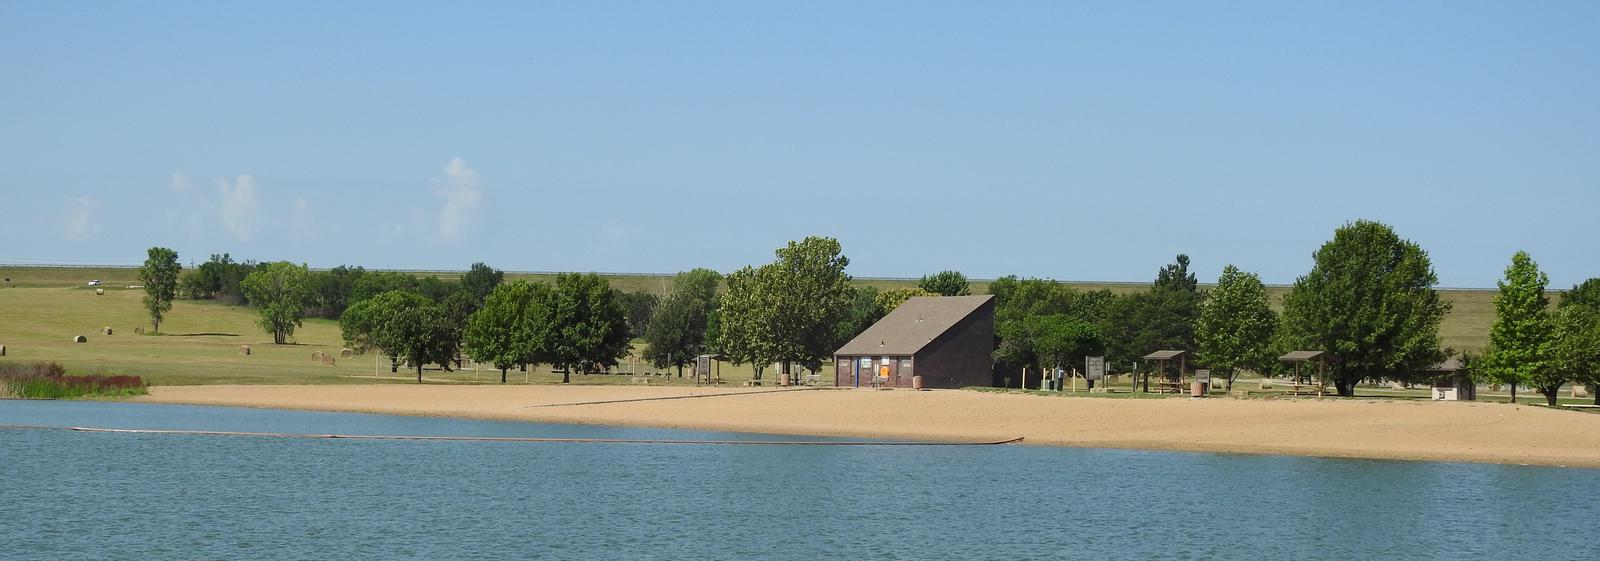 Outlet Park swimming beach